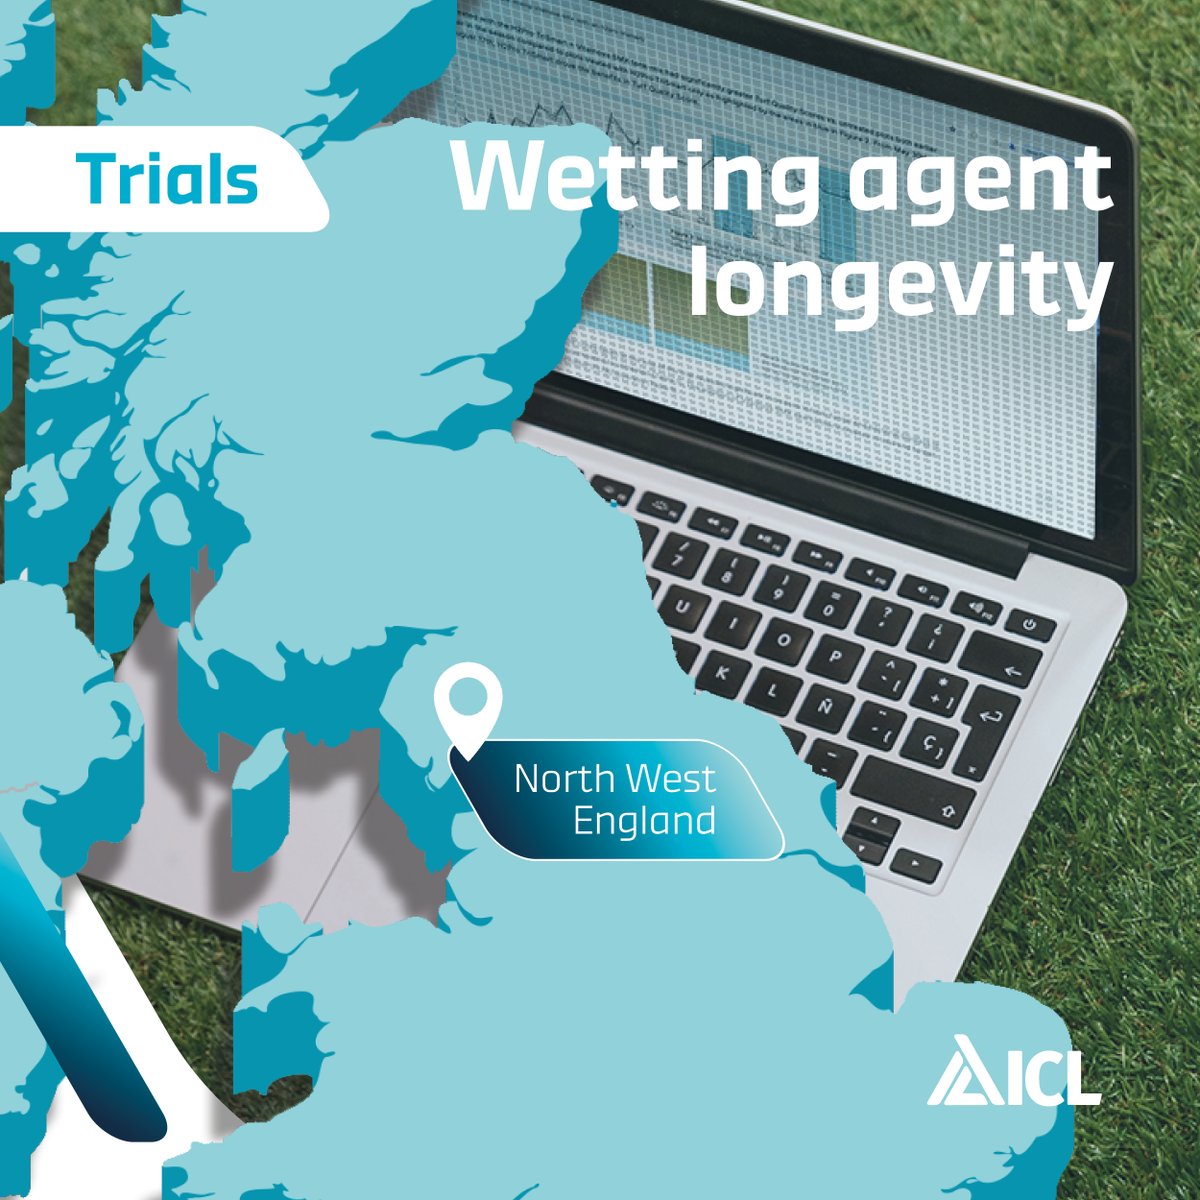 In a recent trial, we found that applying H2Pro TriSmart bi-monthly at a double rate proved just as effective as monthly applications. This not only maintains efficacy but also offers significant savings in both manpower & resources. Trial info > bit.ly/wettingagentlo…